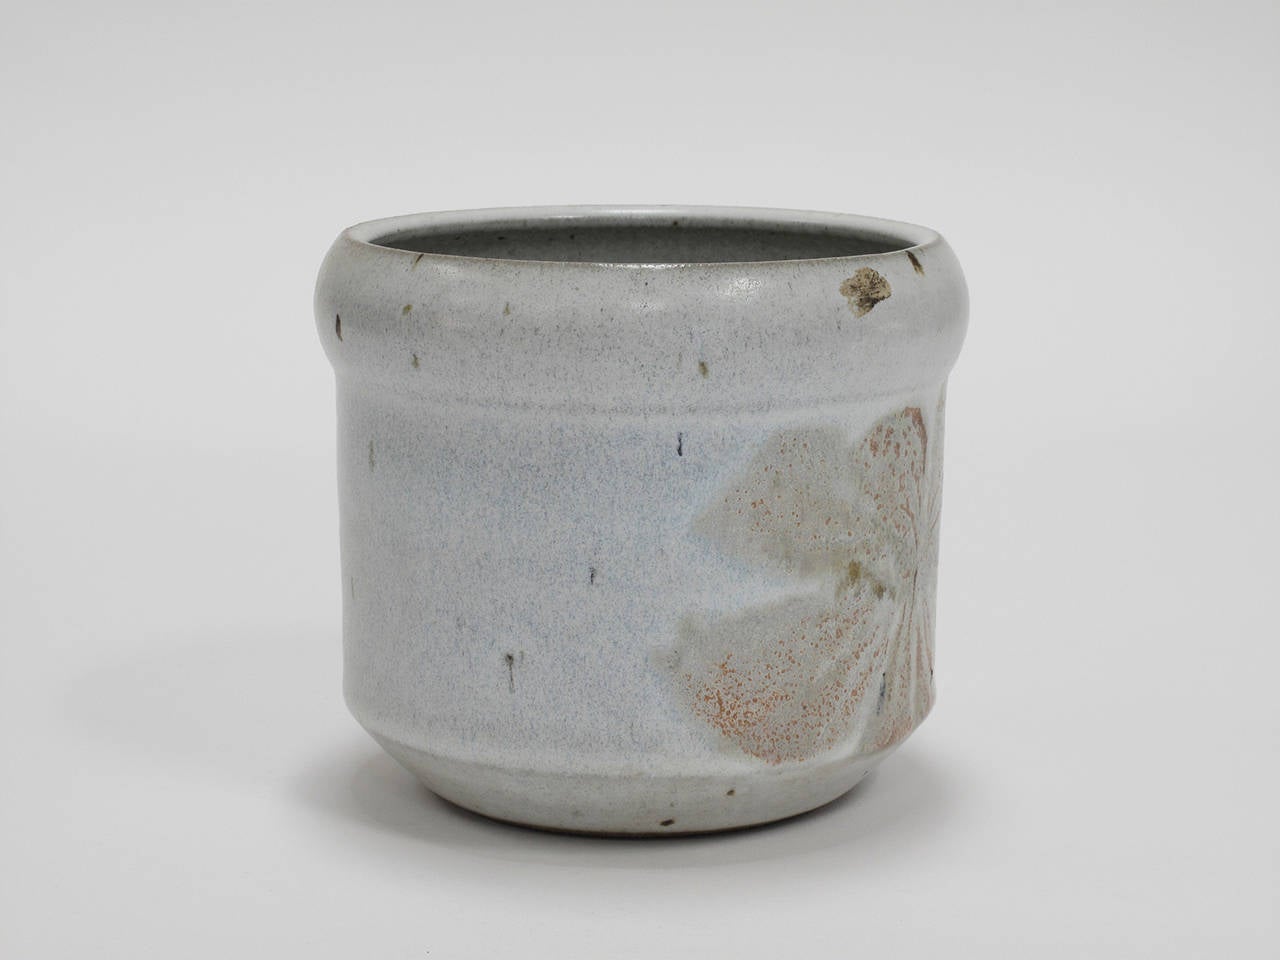 American David Cressey and Robert Maxwell Glazed Ceramic Flower Pot, Earthgender, 1970s For Sale